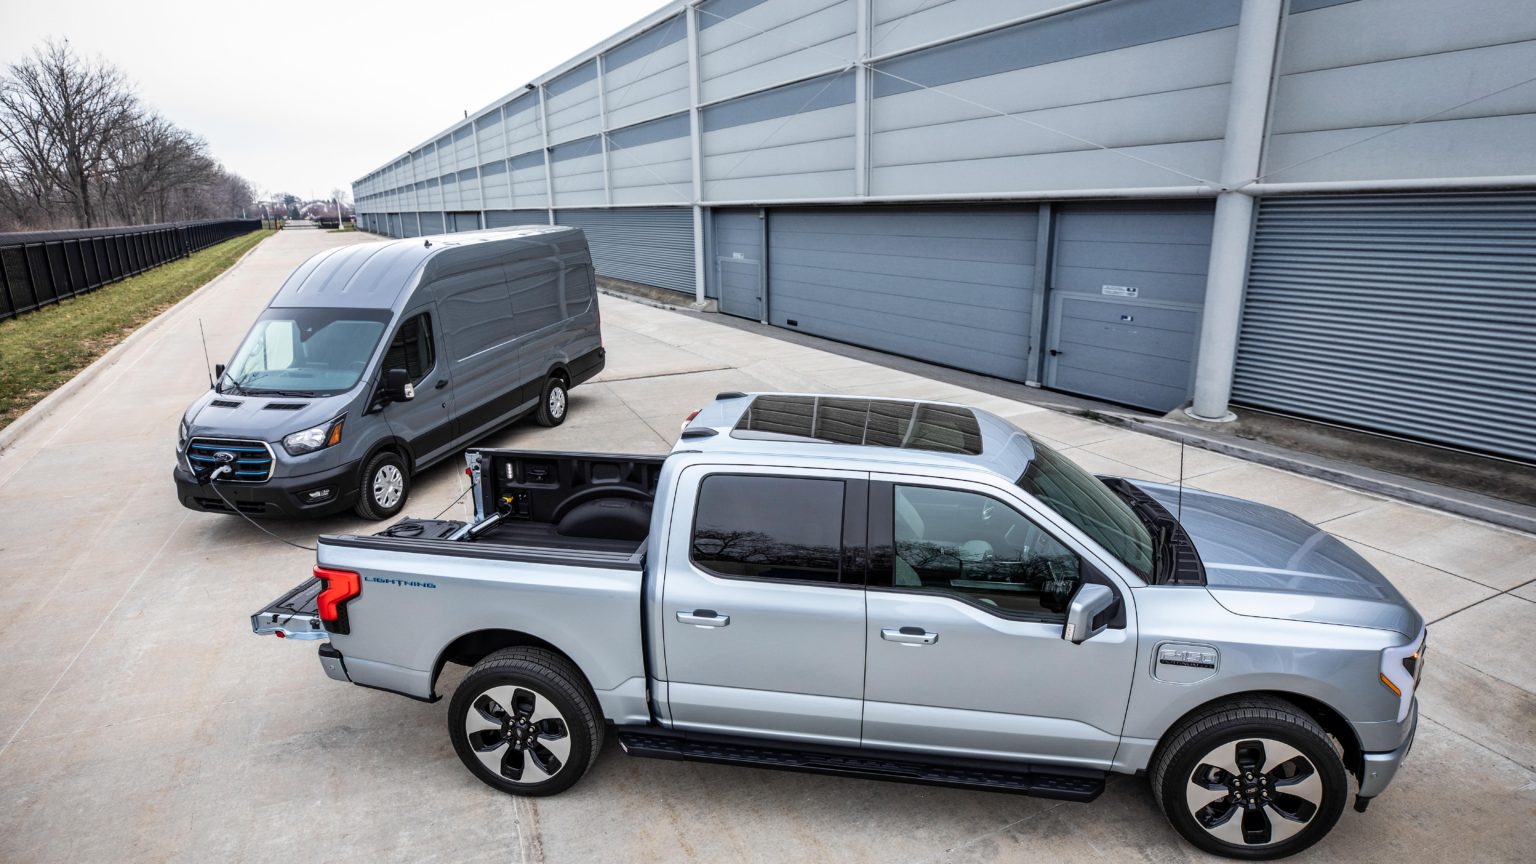 The F-150 Lightning and F-150 PowerBoost Hybrid offer charging abilities for other EVs.